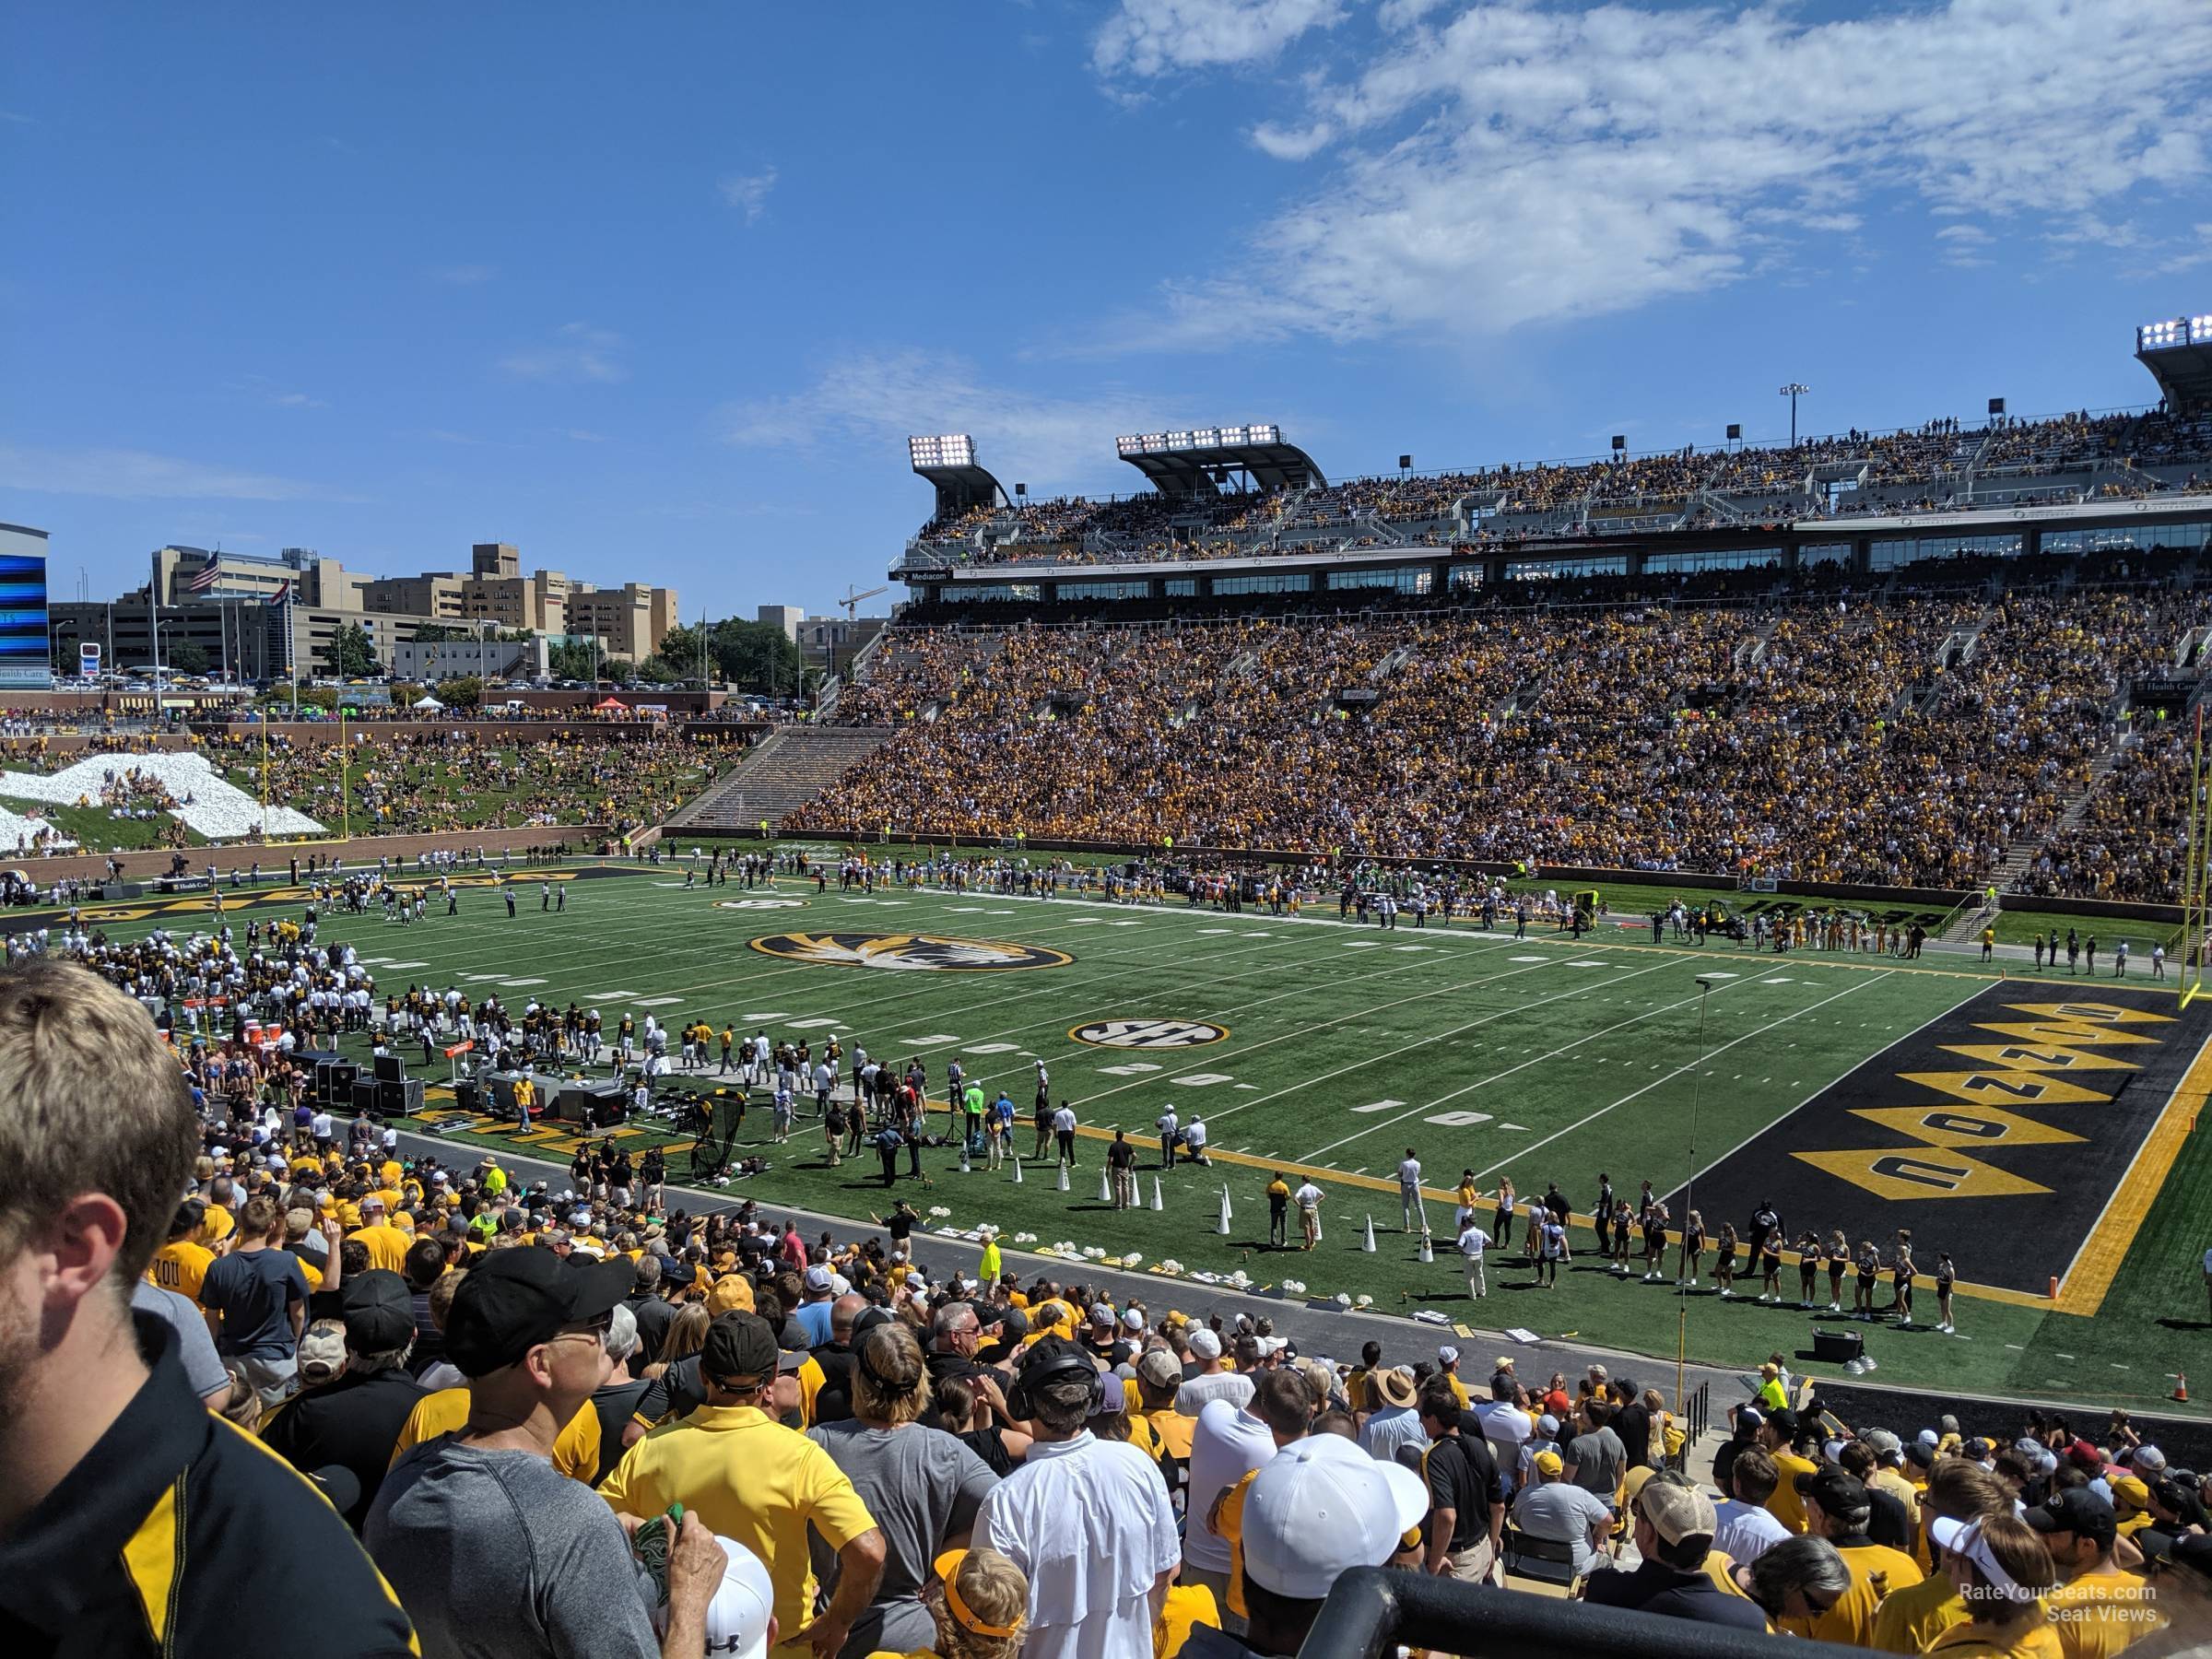 section 125, row 38 seat view  - faurot field